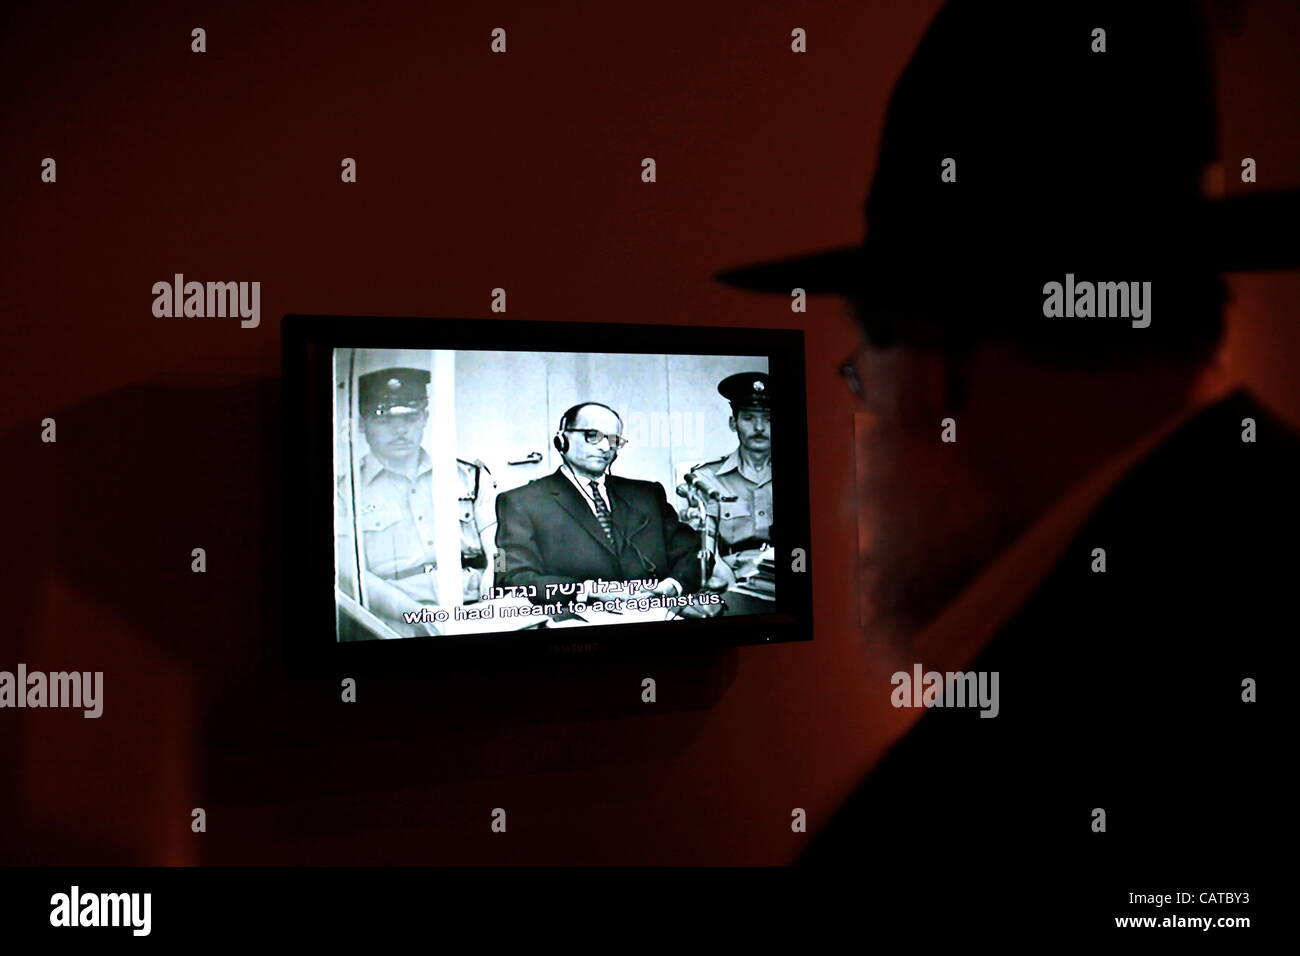 An orthodox Jewish visitor watches an archive film of the trial of SS Nazi officer Adolph Eichmann in Jerusalem in 1961 displayed in an exhibition at Beit Hatfutsot, the Museum of the Jewish People in Tel Aviv University Stock Photo